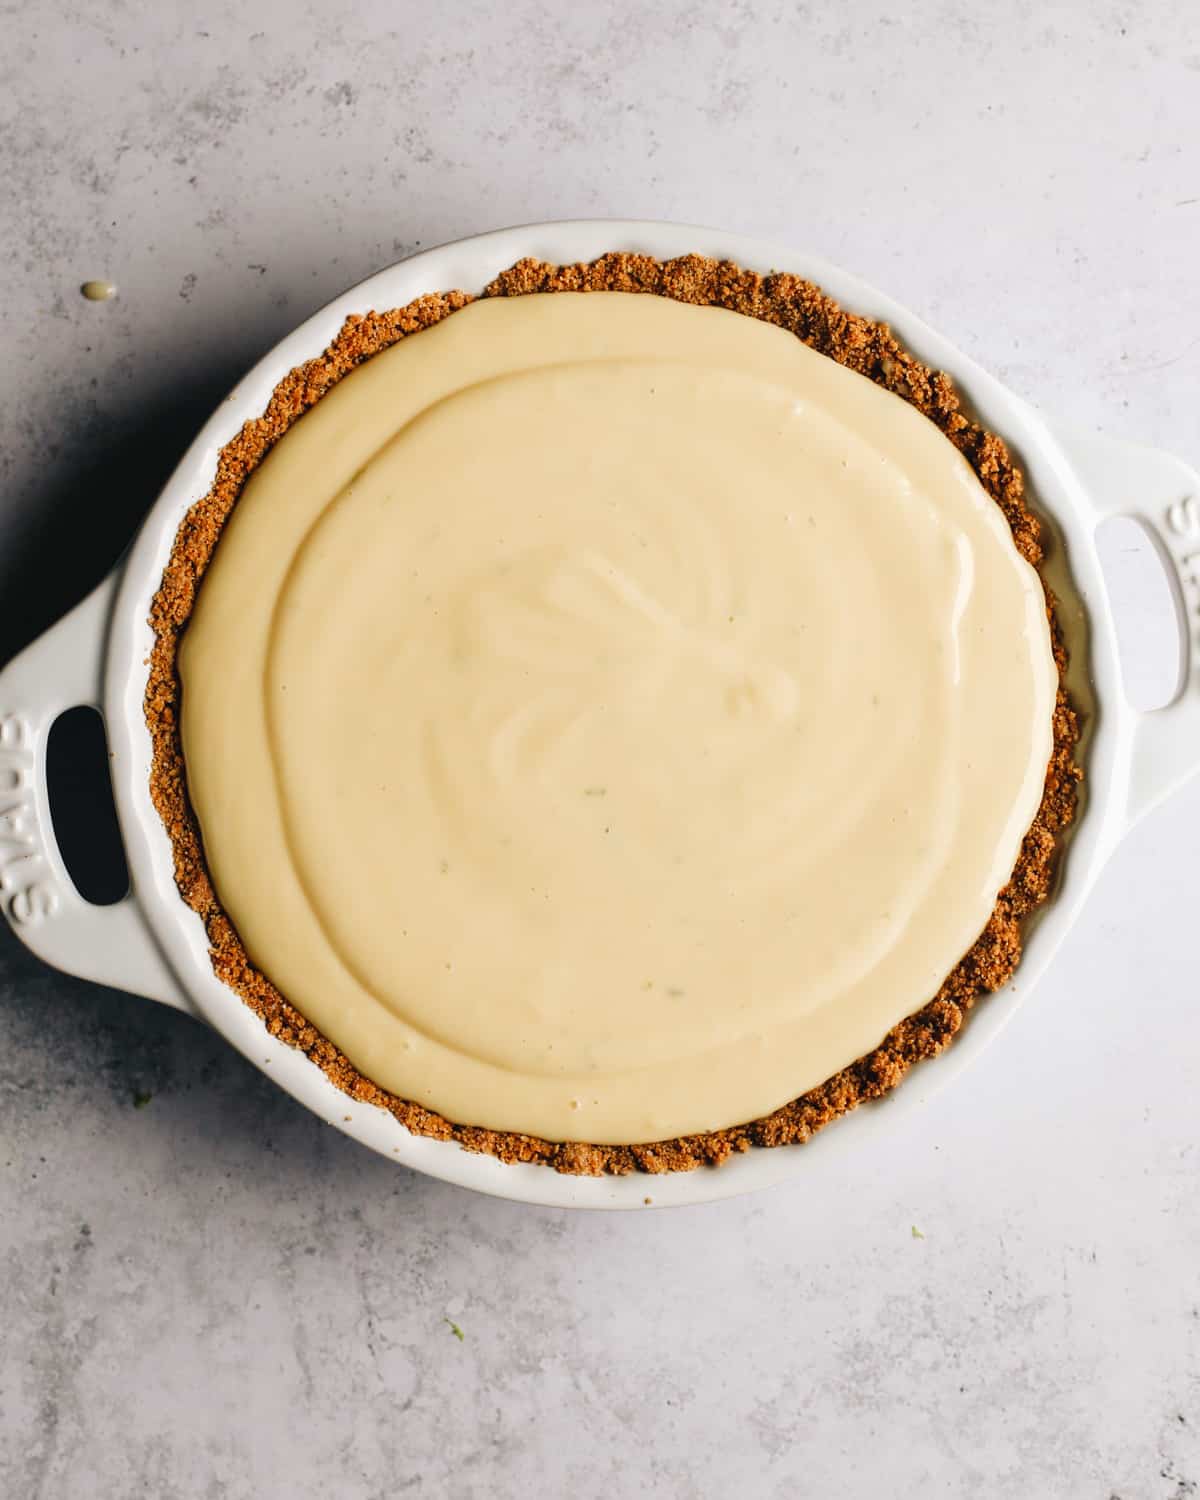 key lime pie in a baking dish before baking